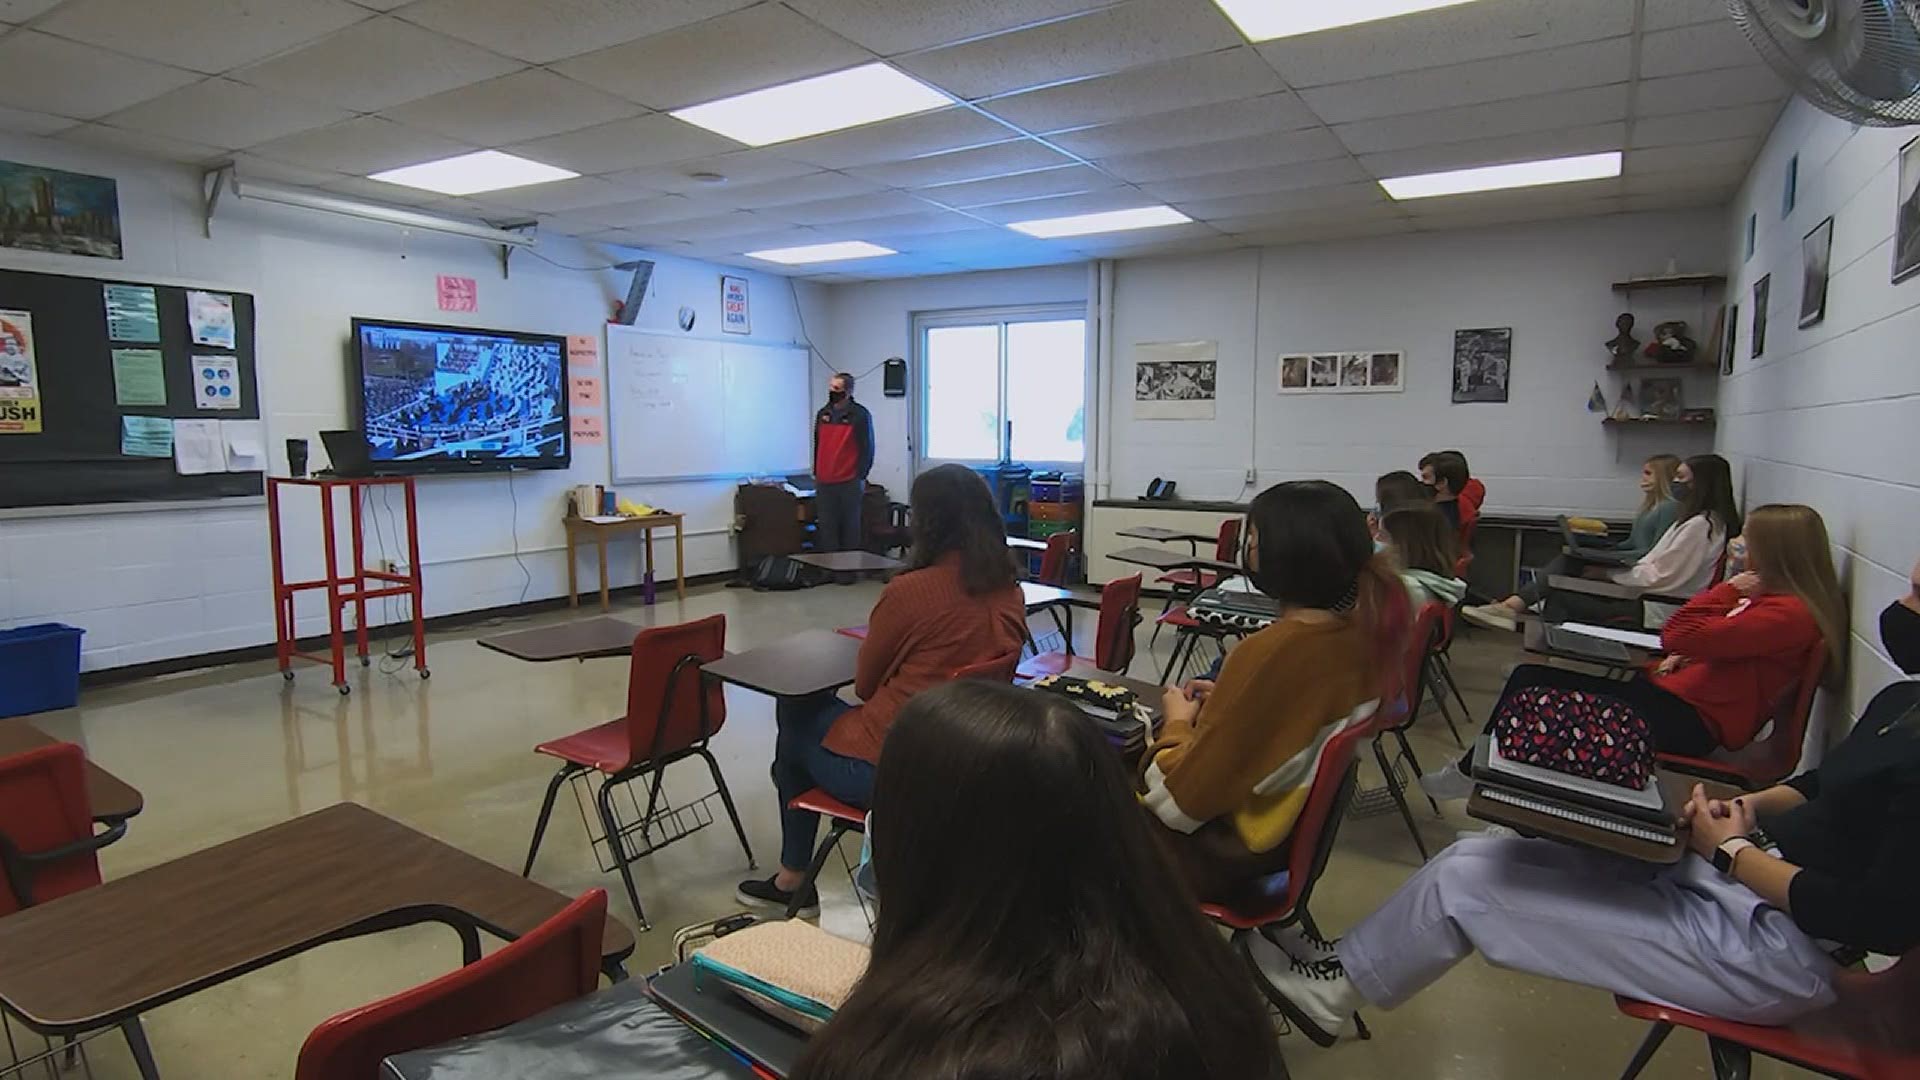 About a dozen students watched part of President Biden's inaugural address, as part of their political science class at Orion High School.